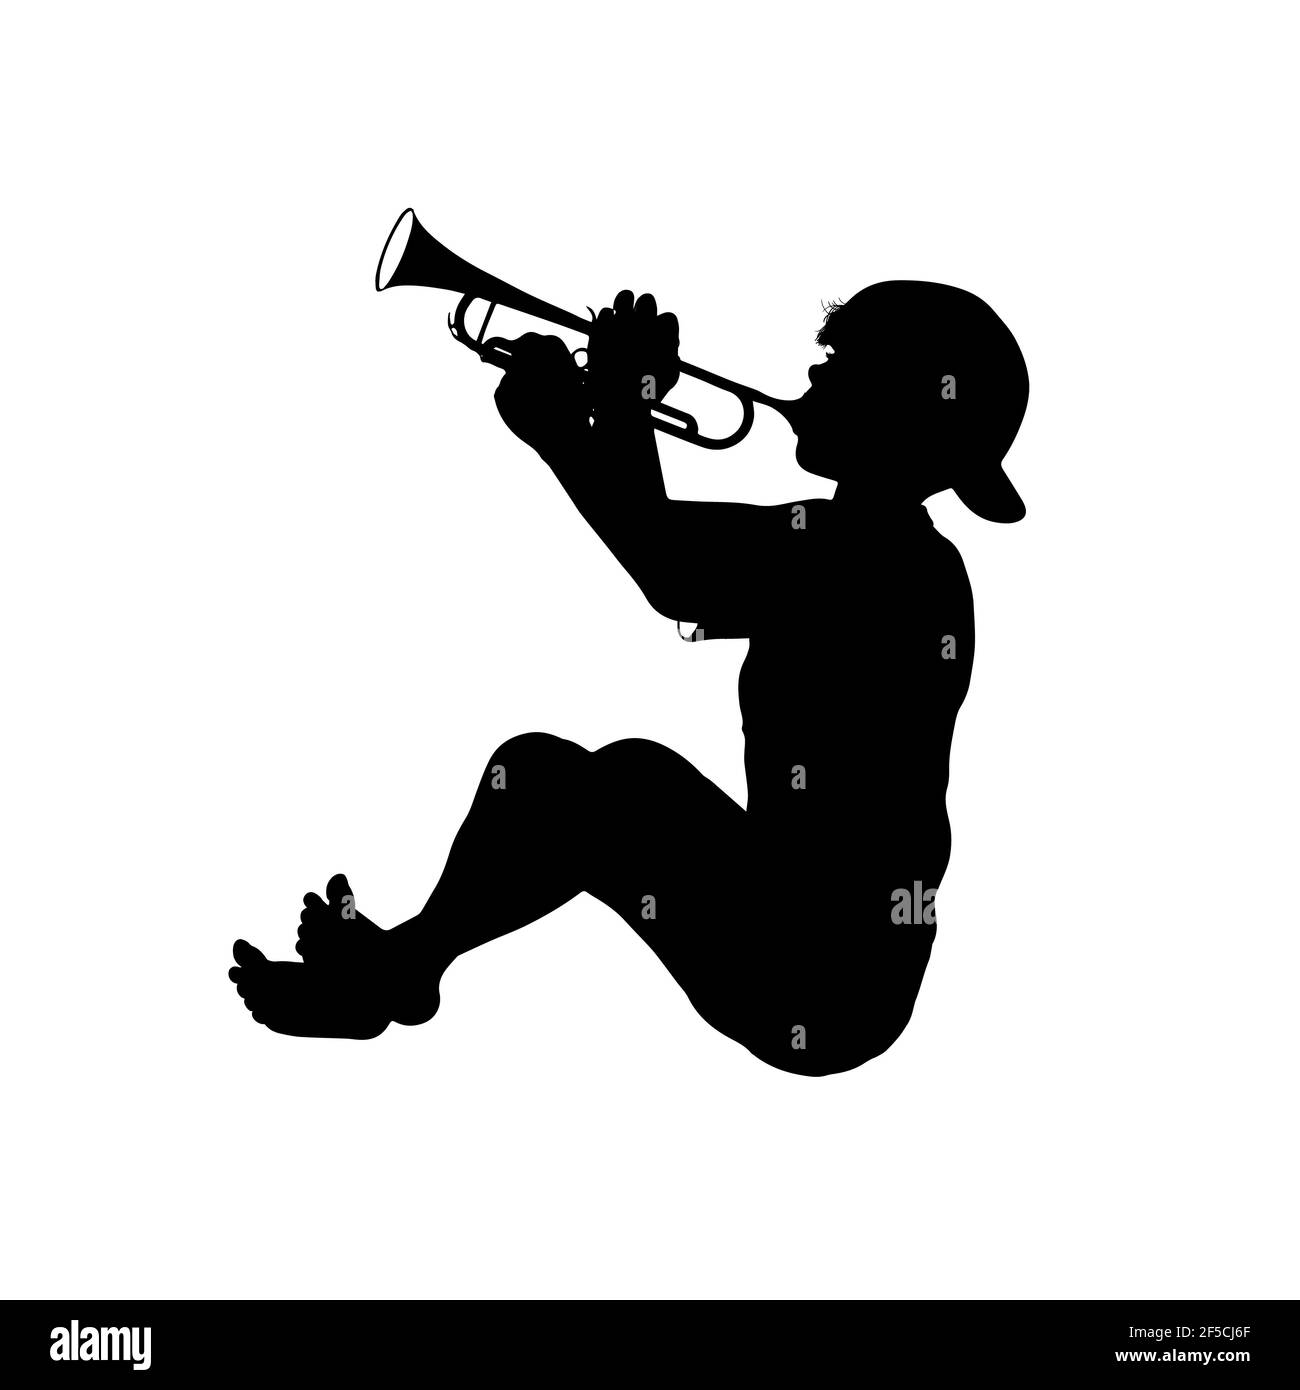 Silhouette boy kid playing trumpet music instrument sitting barefoot happy joy sound play practicing student teenager music school logo template desig Stock Photo